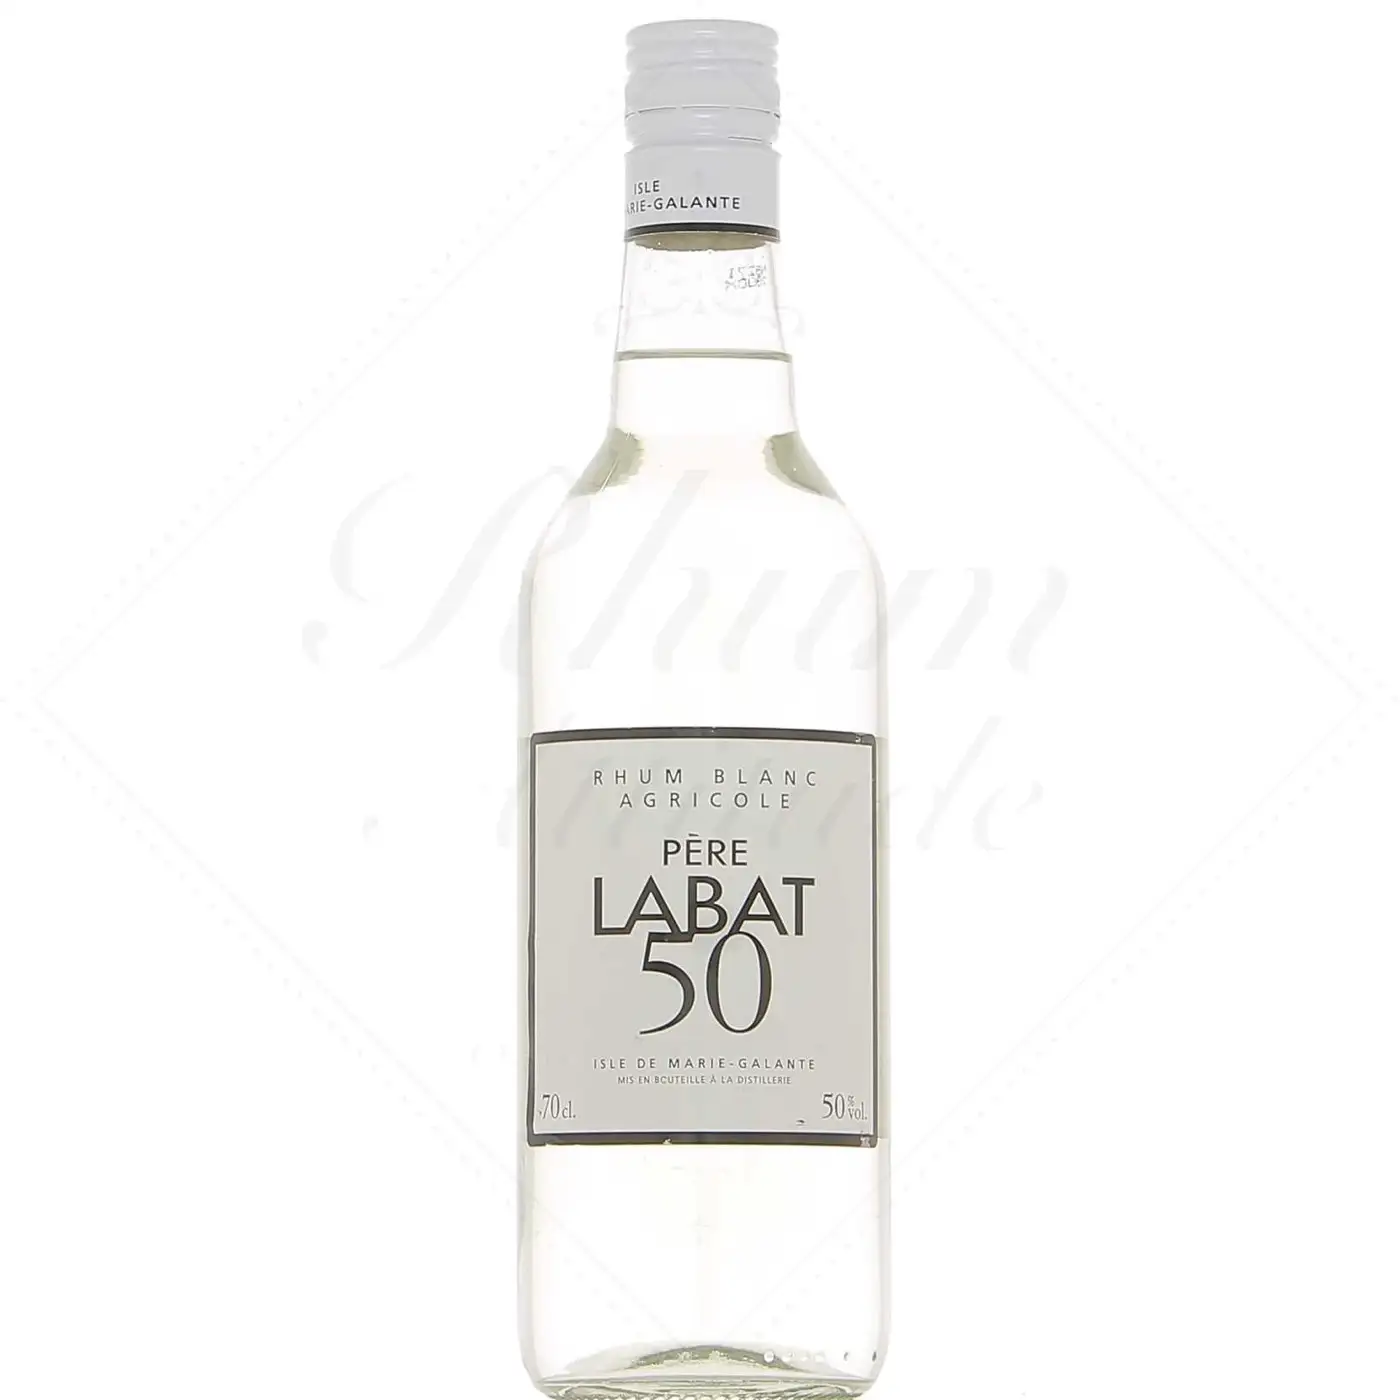 Image of the front of the bottle of the rum Père Labat Rhum Blanc Agricole